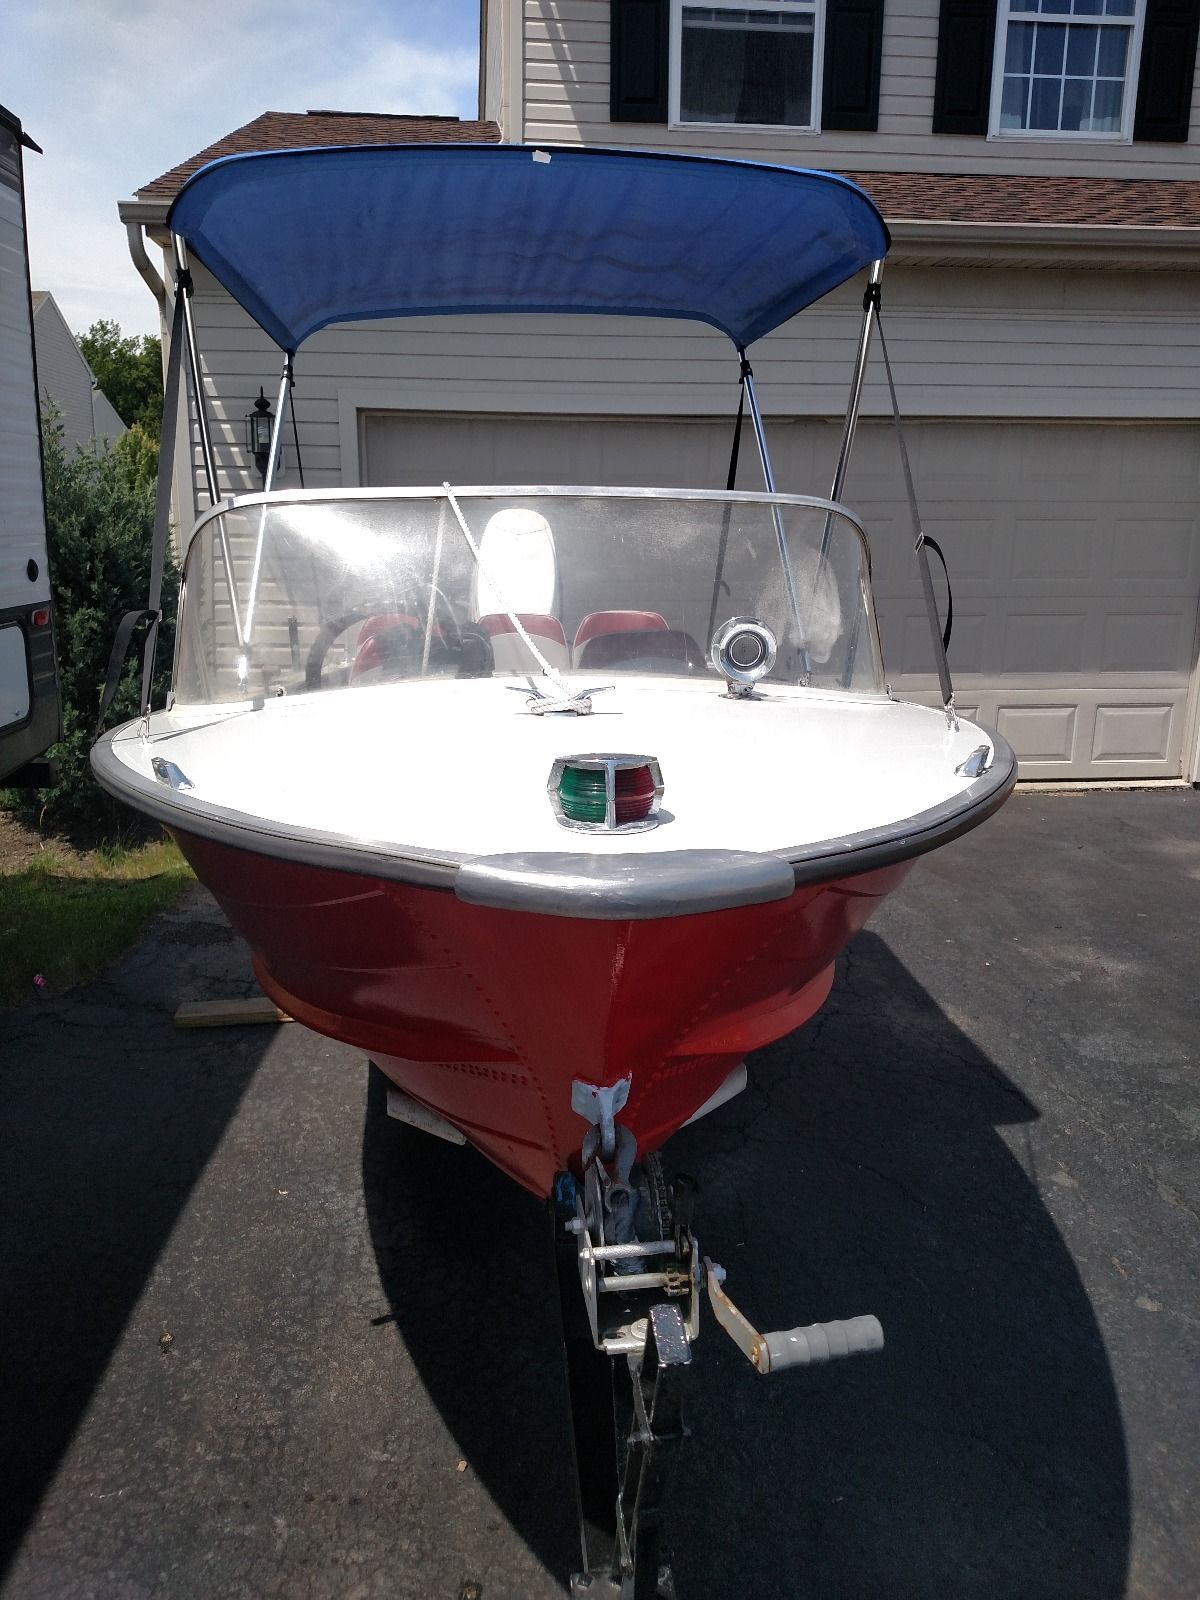 Starcraft Jetstar 1967 for sale for $2,500 - Boats-from ... boat fuse box location 